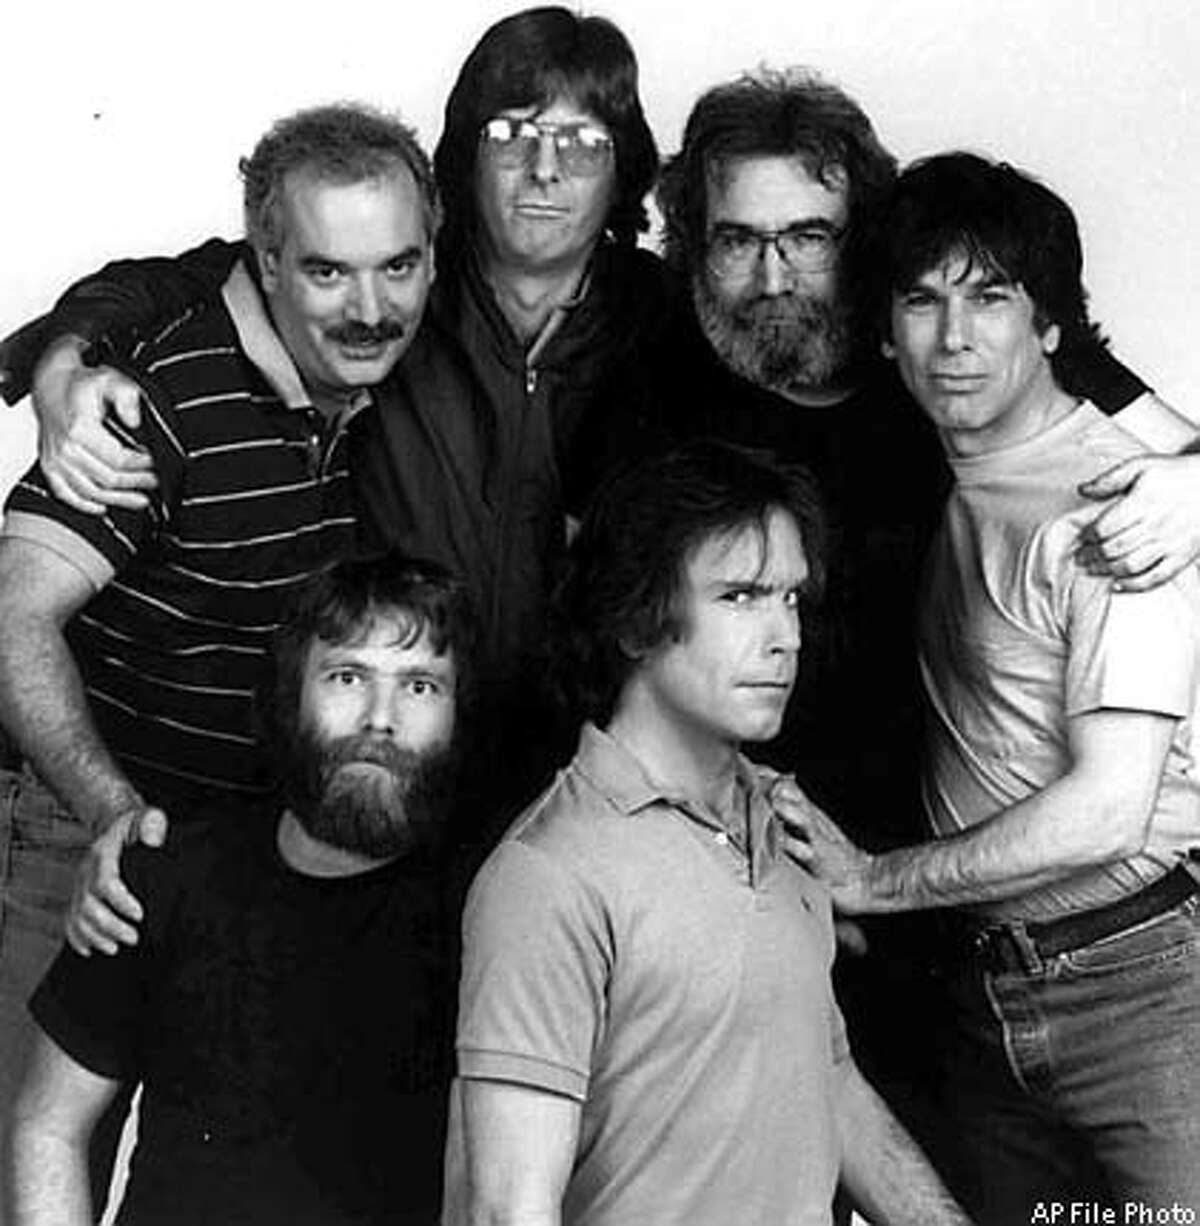 ** FILE ** Members of the Grateful Dead pose in a1985 photo in Marin County, Calif. From left, back row, are Bill Kreutzman, Phil Lesh, Jerry Garcia, and Mickey Hart. In front are Brent Mydland, left, and Bob Weir. After lead singer Jerry Garcia's death in 1995, the Grateful Dead retired from touring. But every now and then The Other Ones, the band's surviving members, put on a show. Bassist Phil Lesh, guitarist Bob Weir and drummers Bill Kreutzman and Mickey Hart quickly sold 70,000 tickets to two shows Aug. 3-4, 2002 in East Troy, Wis. (AP Photo)